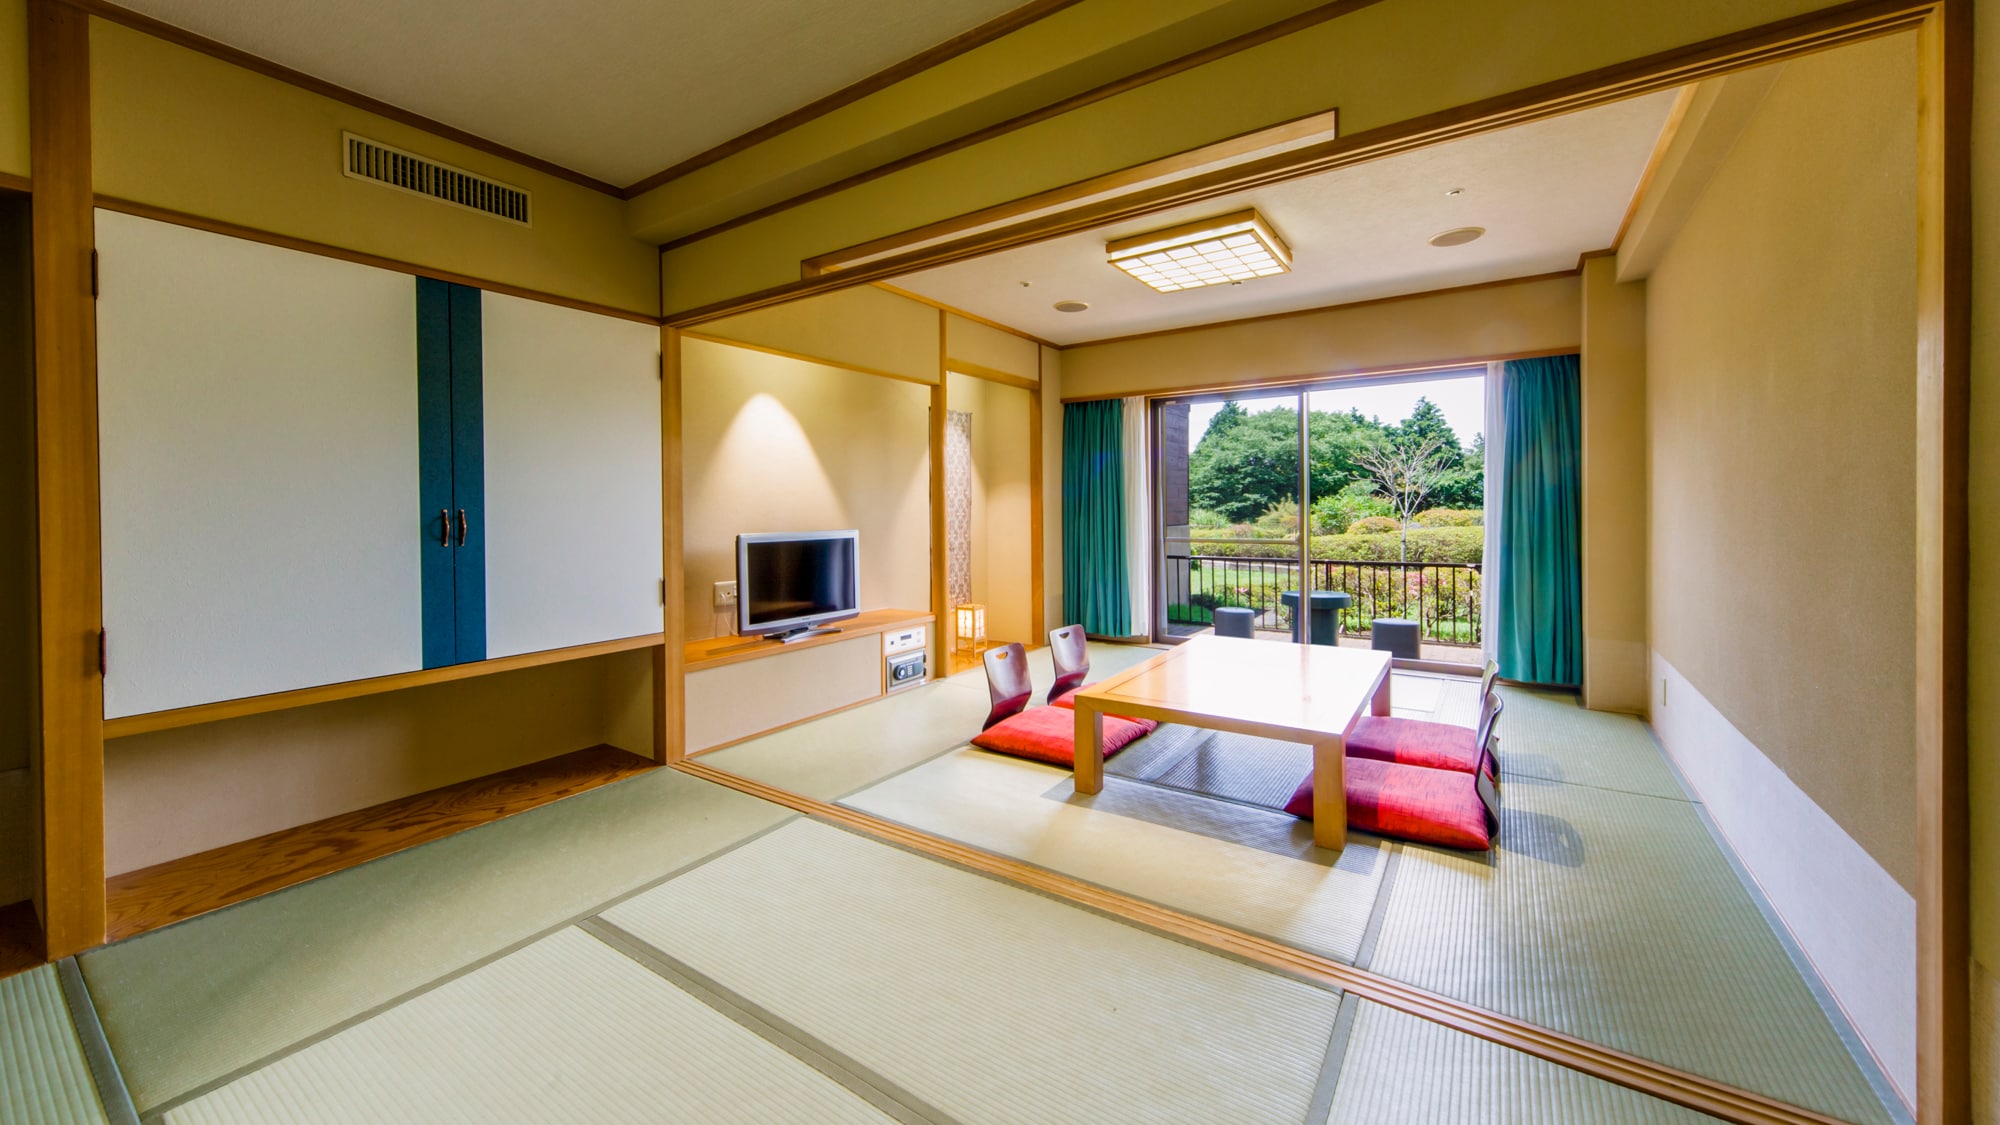 Japanese-style room example